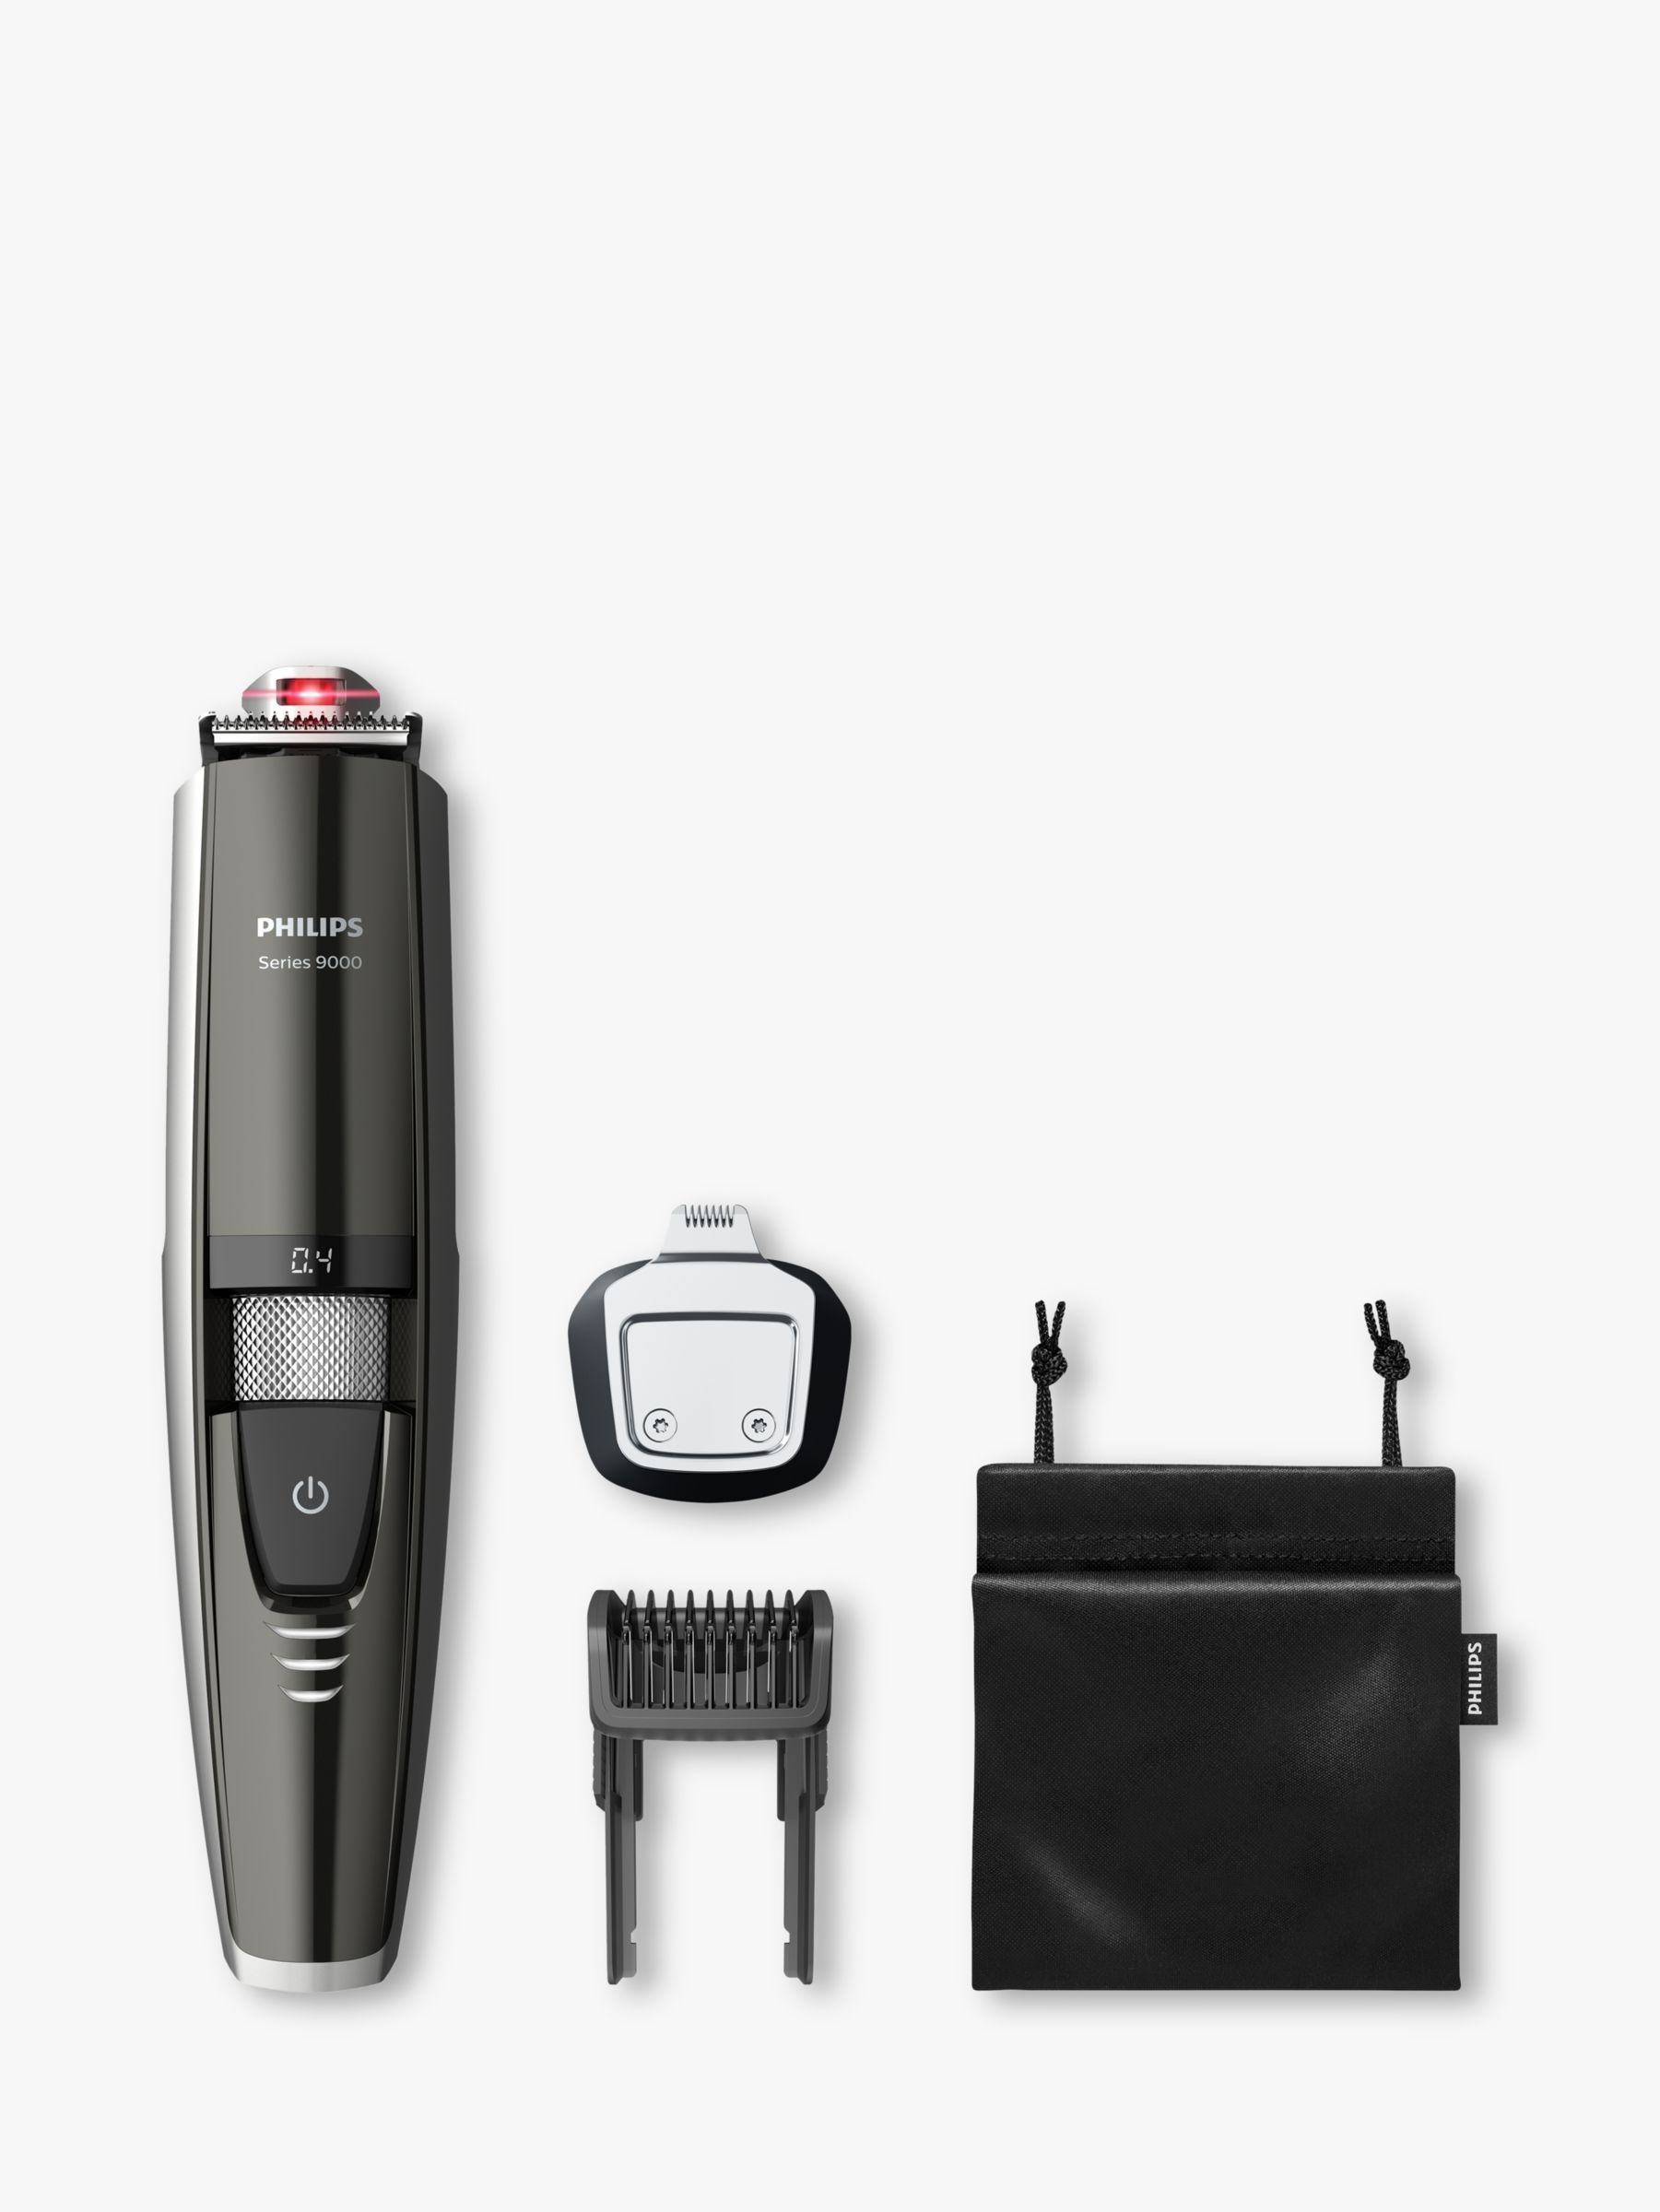 Muldyr dato menu Philips BT9297/13 Series 9000 Laser Guided Beard and Stubble Trimmer